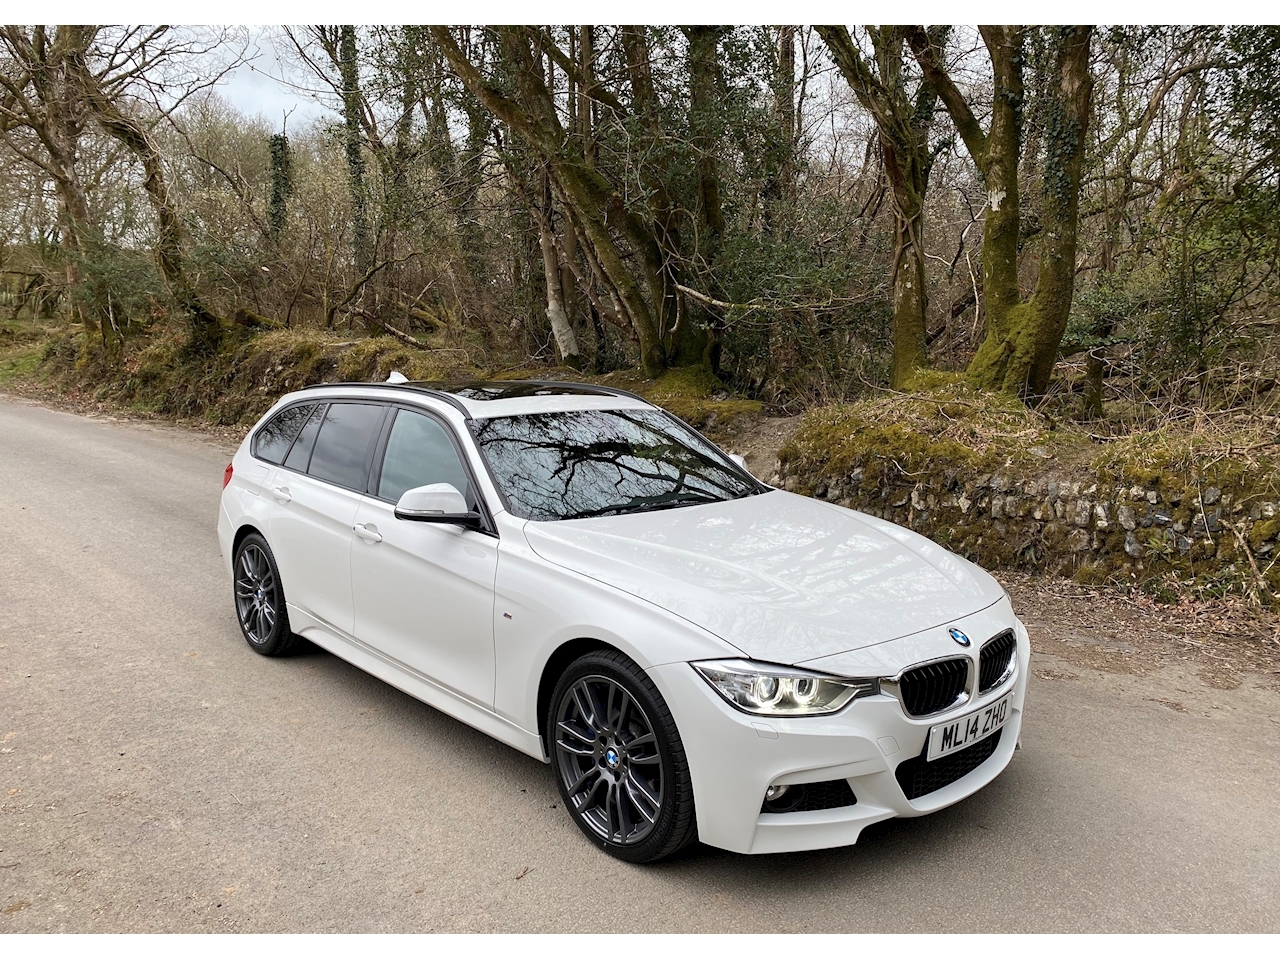 2.0 320d M Sport Touring 5dr Diesel Automatic xDrive (s/s) (133 g/km, 184 bhp)